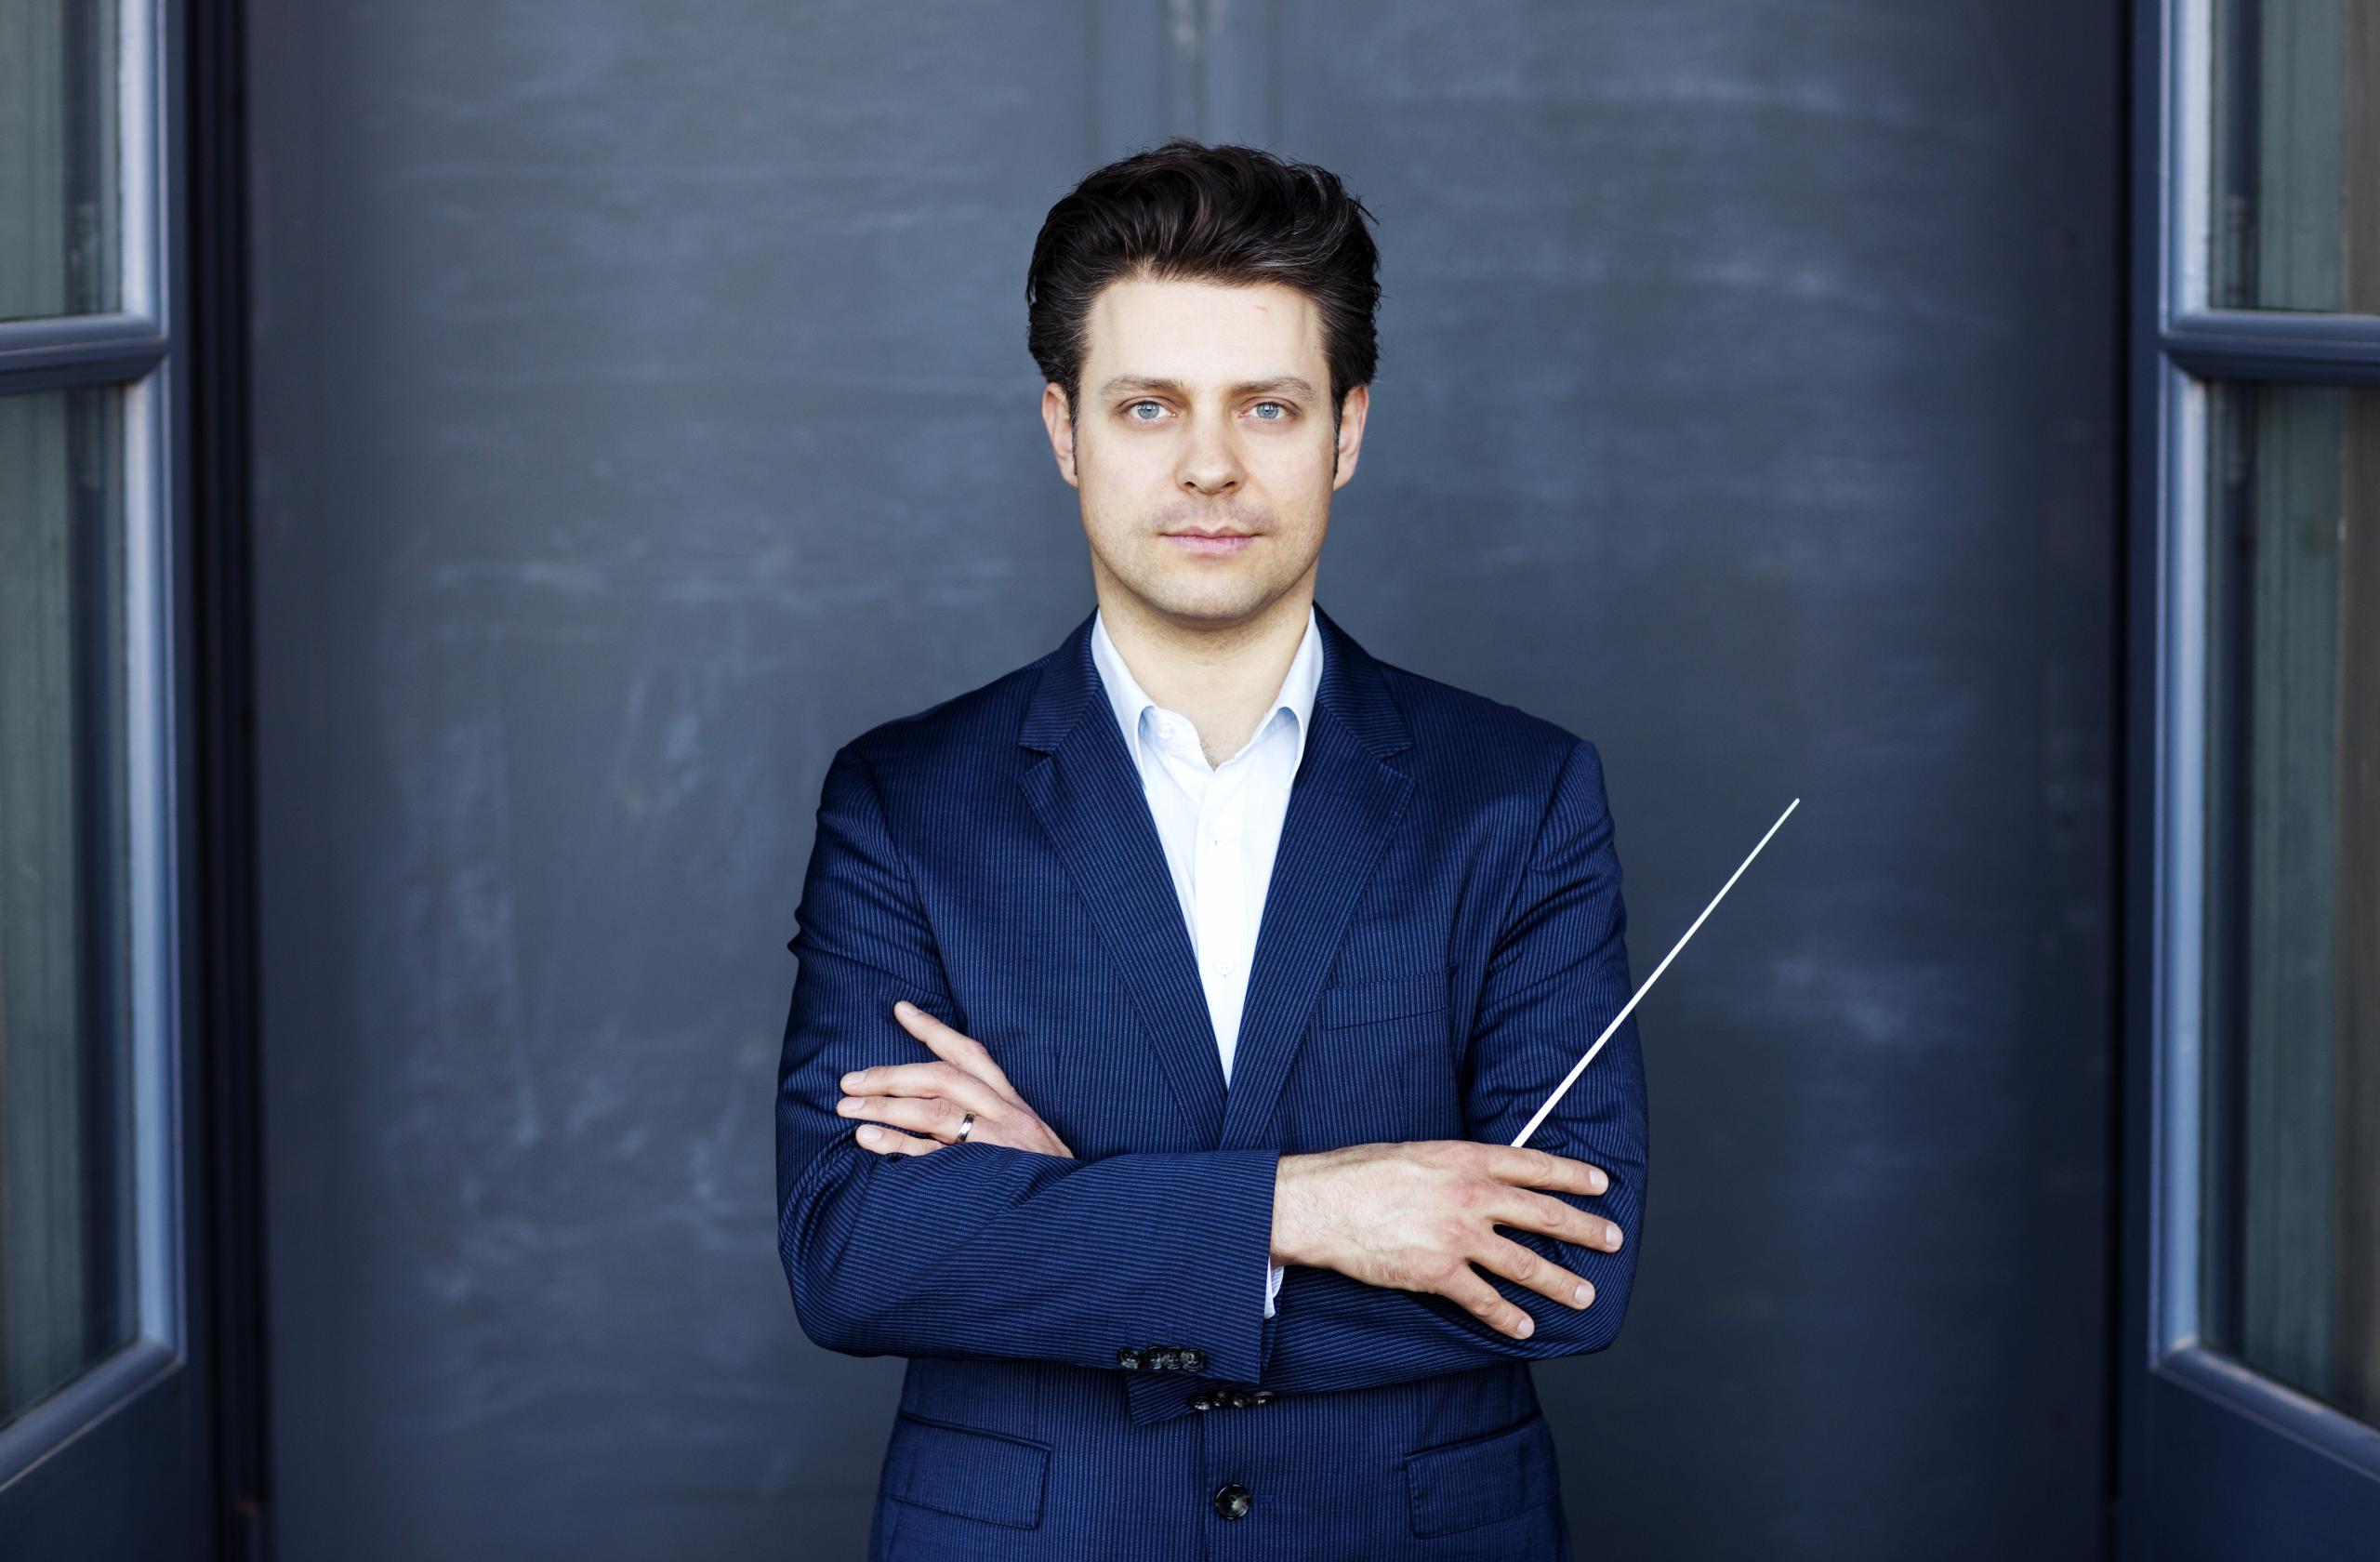 Portrait of the conductor Joseph Bastian. He is wearing a dark blue jacket and is depicted against a grey background.